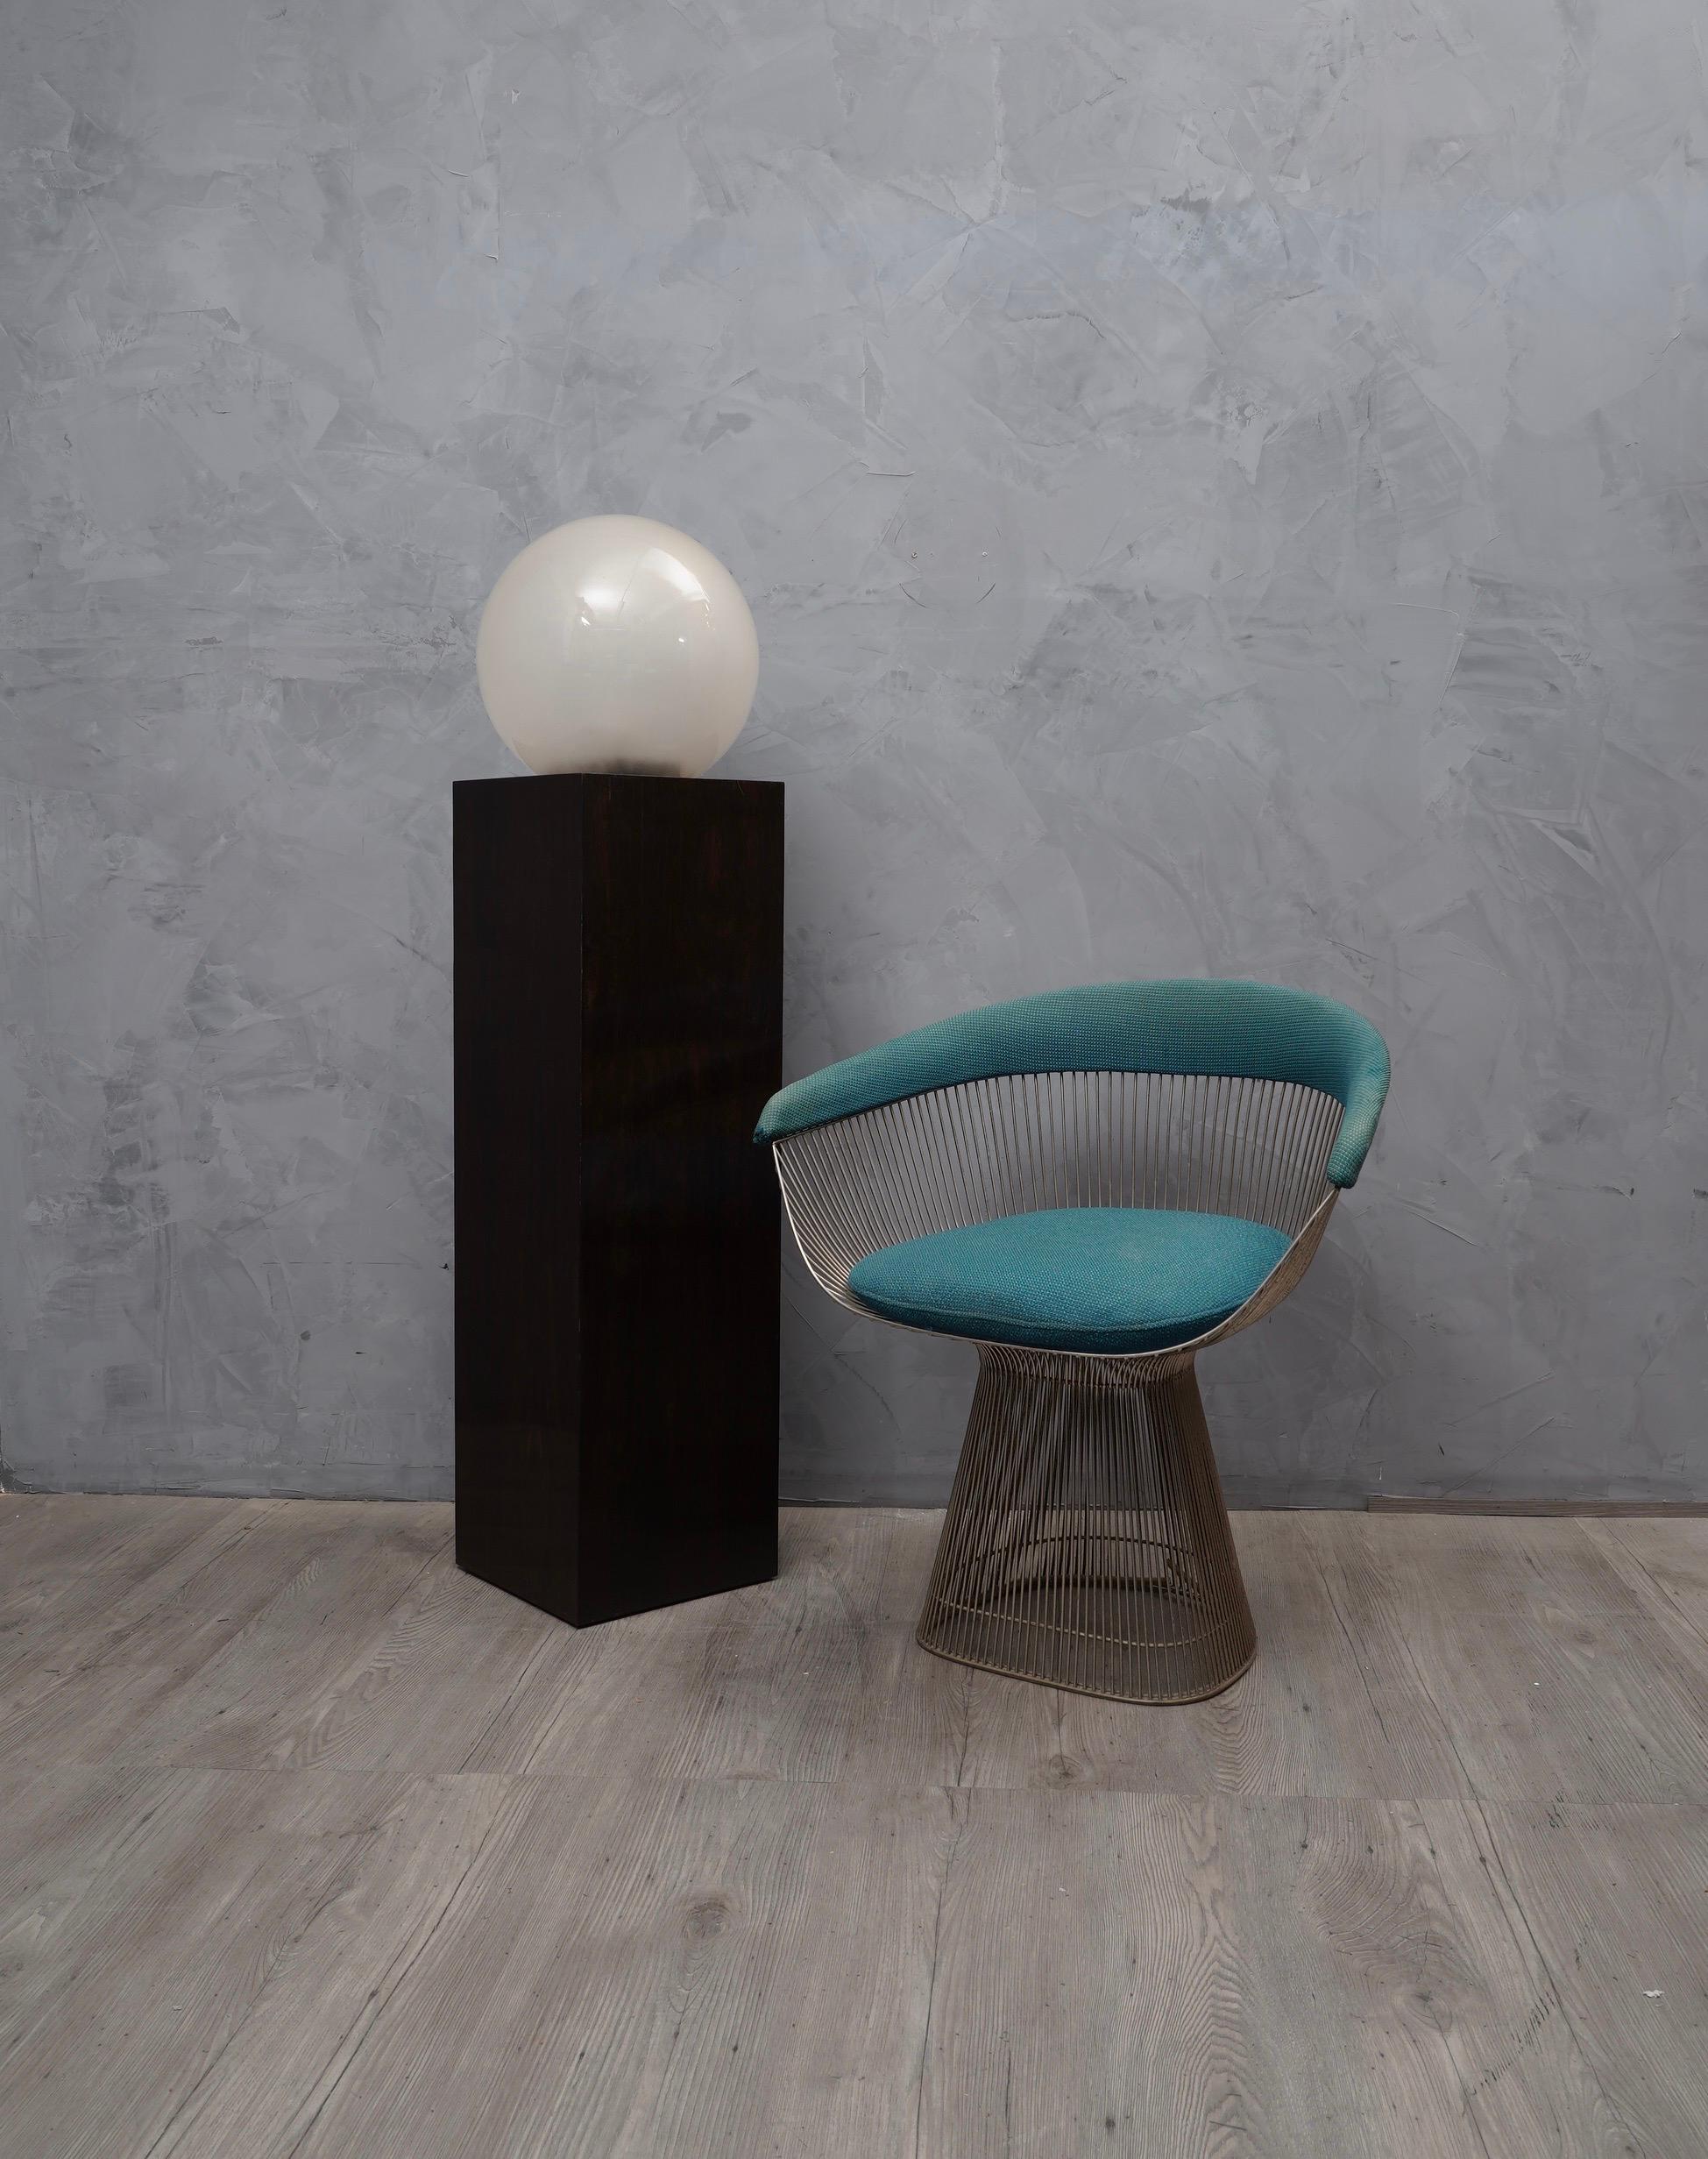 Stunning and unique of floor lamp, with a linear but super-elegant design also due to the use of very precious materials such as Murano glass and ebony / macassar wood.

The table lamps are composed by a large glass spheres positioned on height